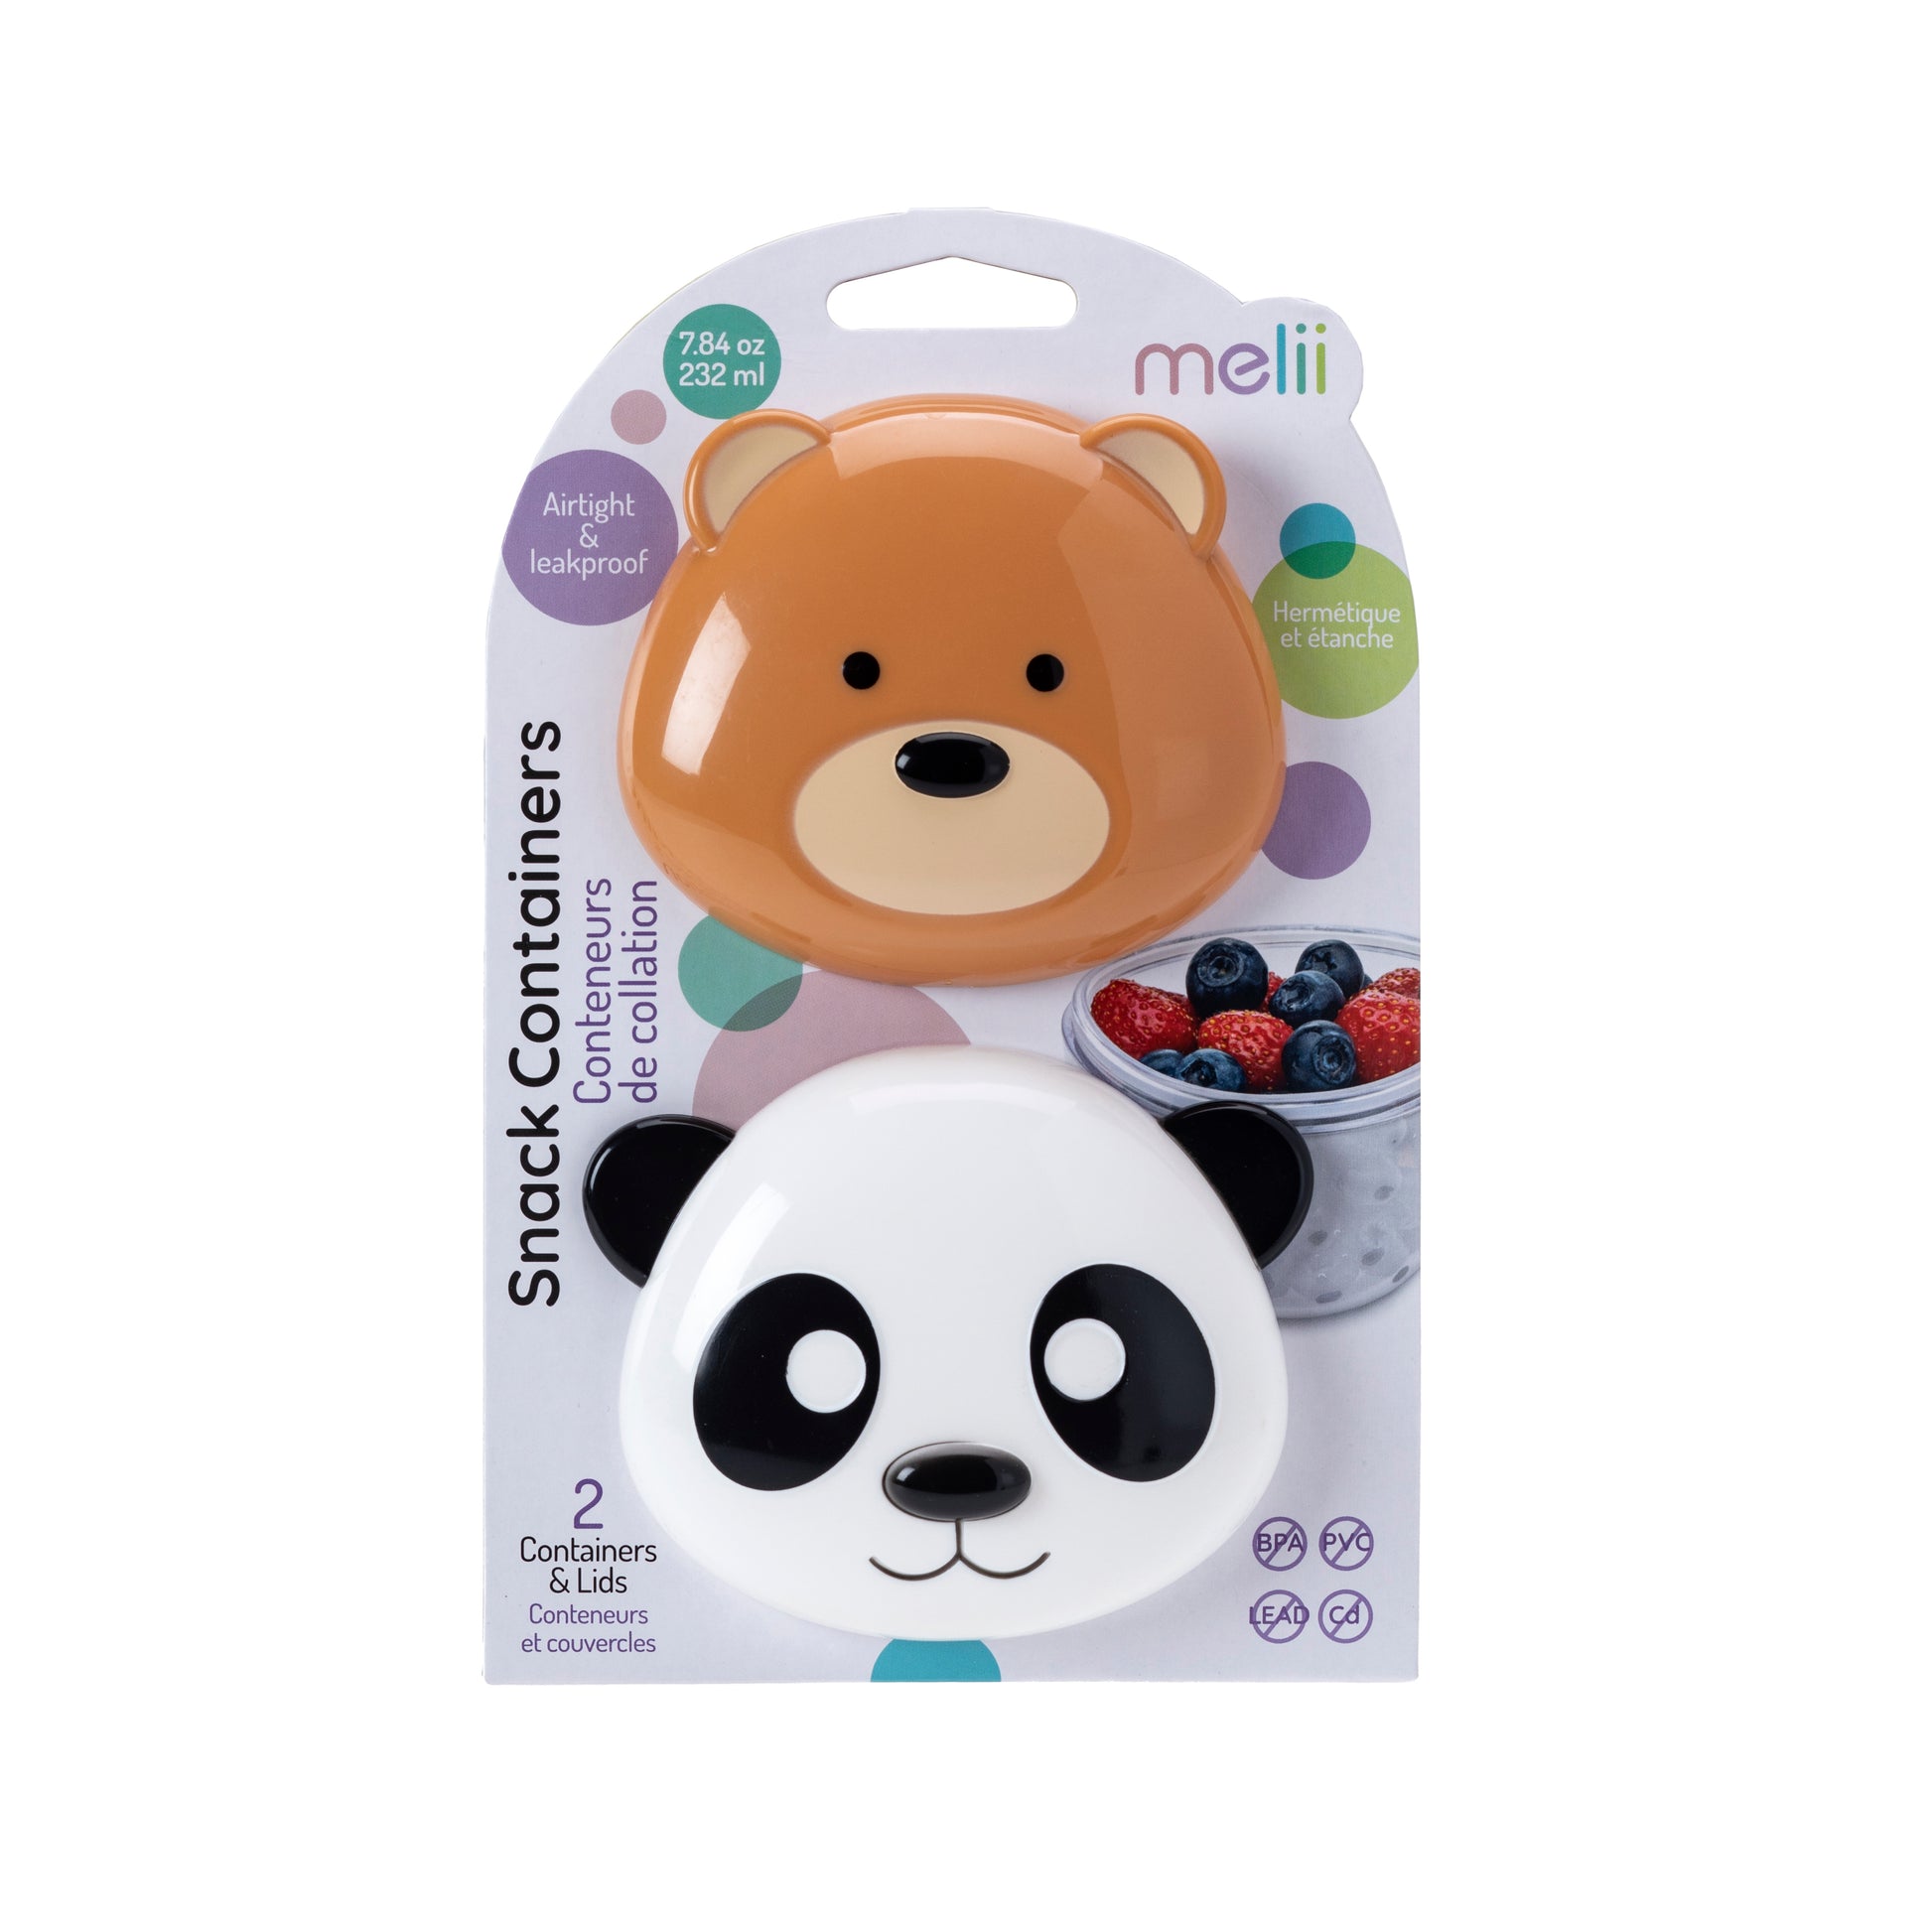 Melii Bear & Panda Snack Containers for Kids - Adorable Airtight, Leakproof Kids Food Storage Set for On-the-Go Joyful Snacking - BPA-Free, Easy to Clean